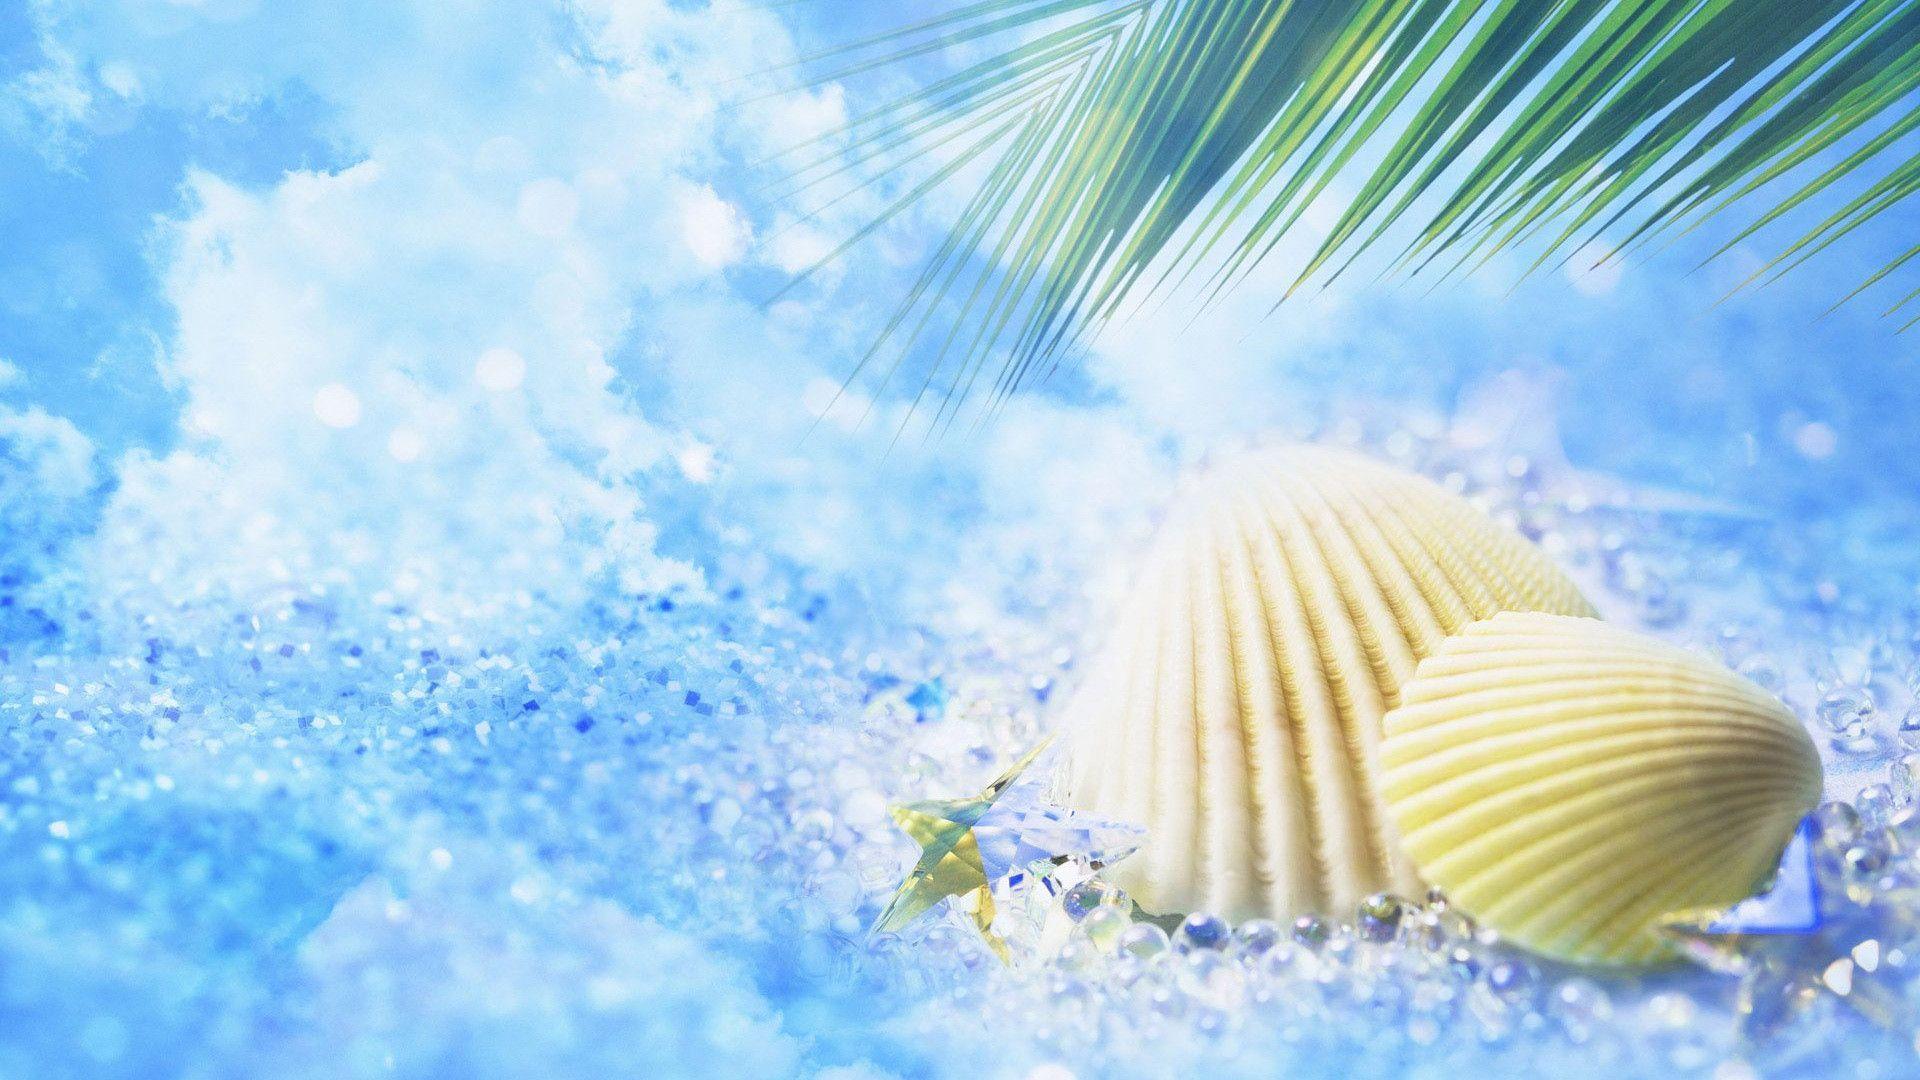 Summer Background Image HD Cool 7 HD Wallpaper. Hdimges